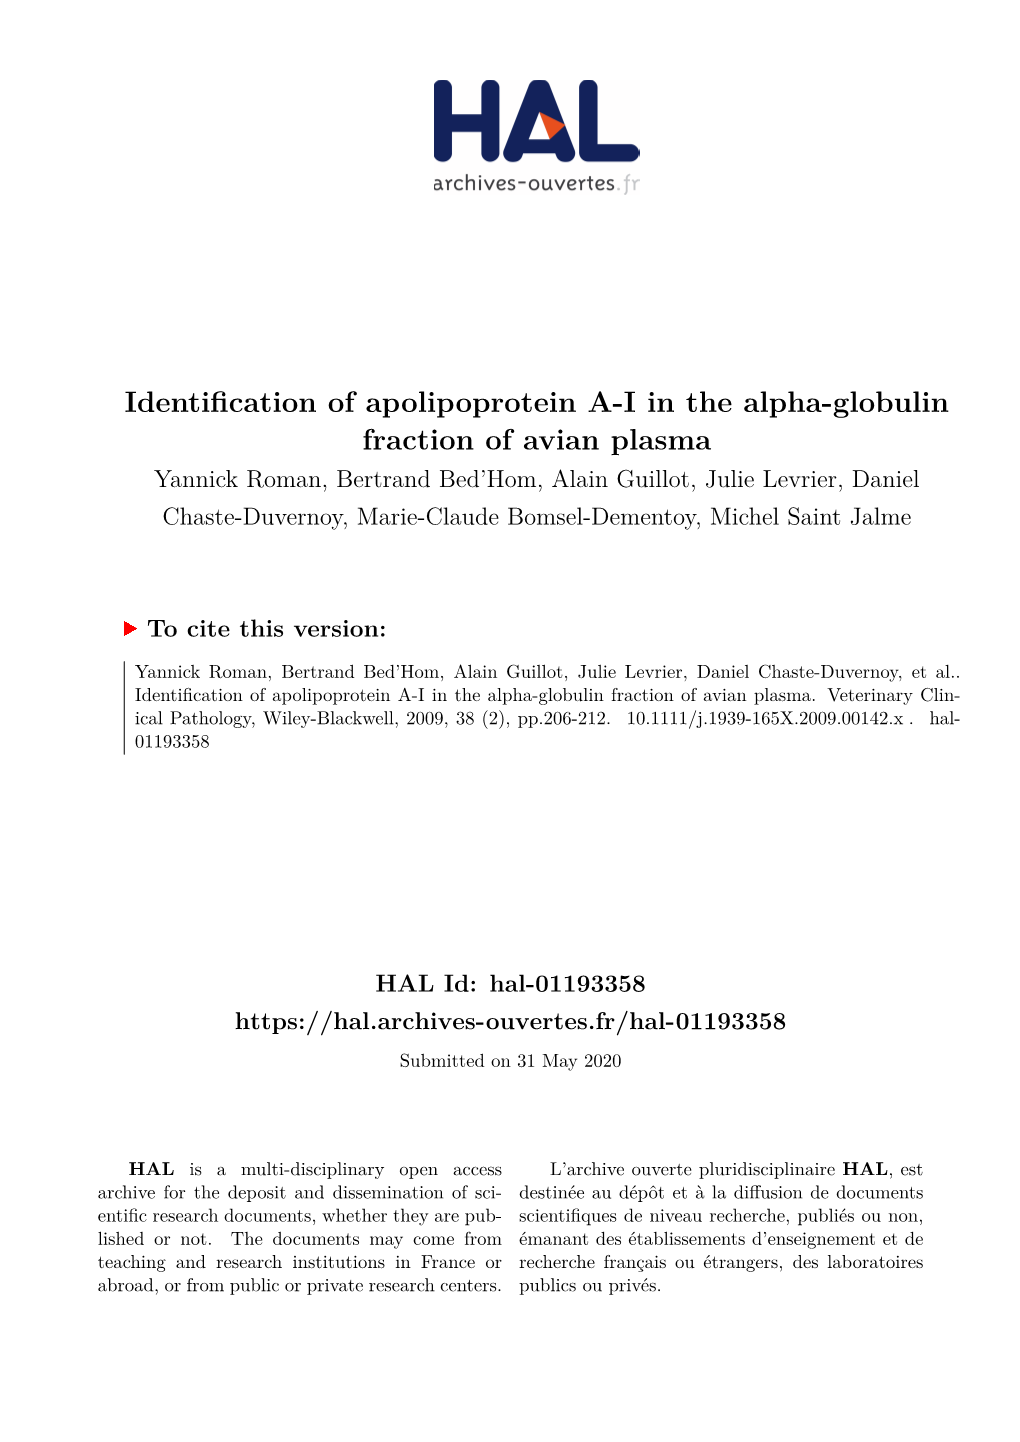 Identification of Apolipoprotein A-I in the Alpha-Globulin Fraction of Avian